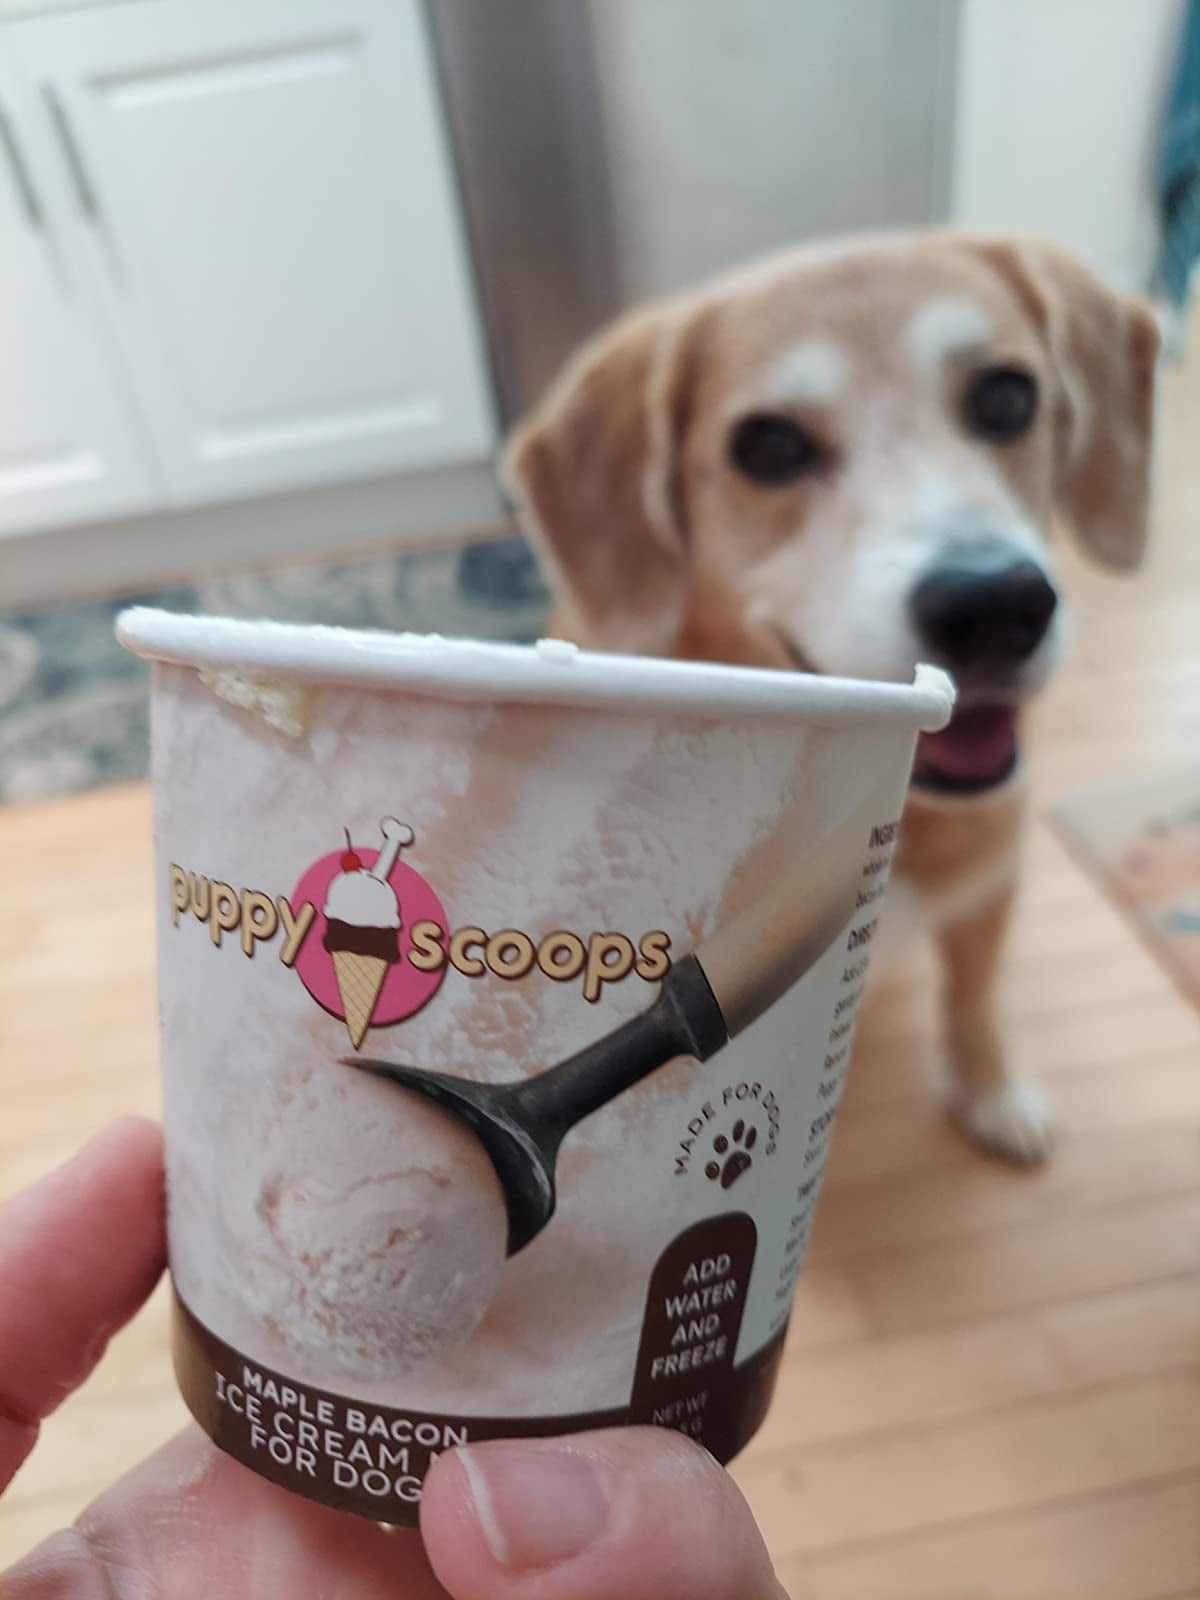 Dog in the background of a photo with a close up of the ice cream container in the foreground